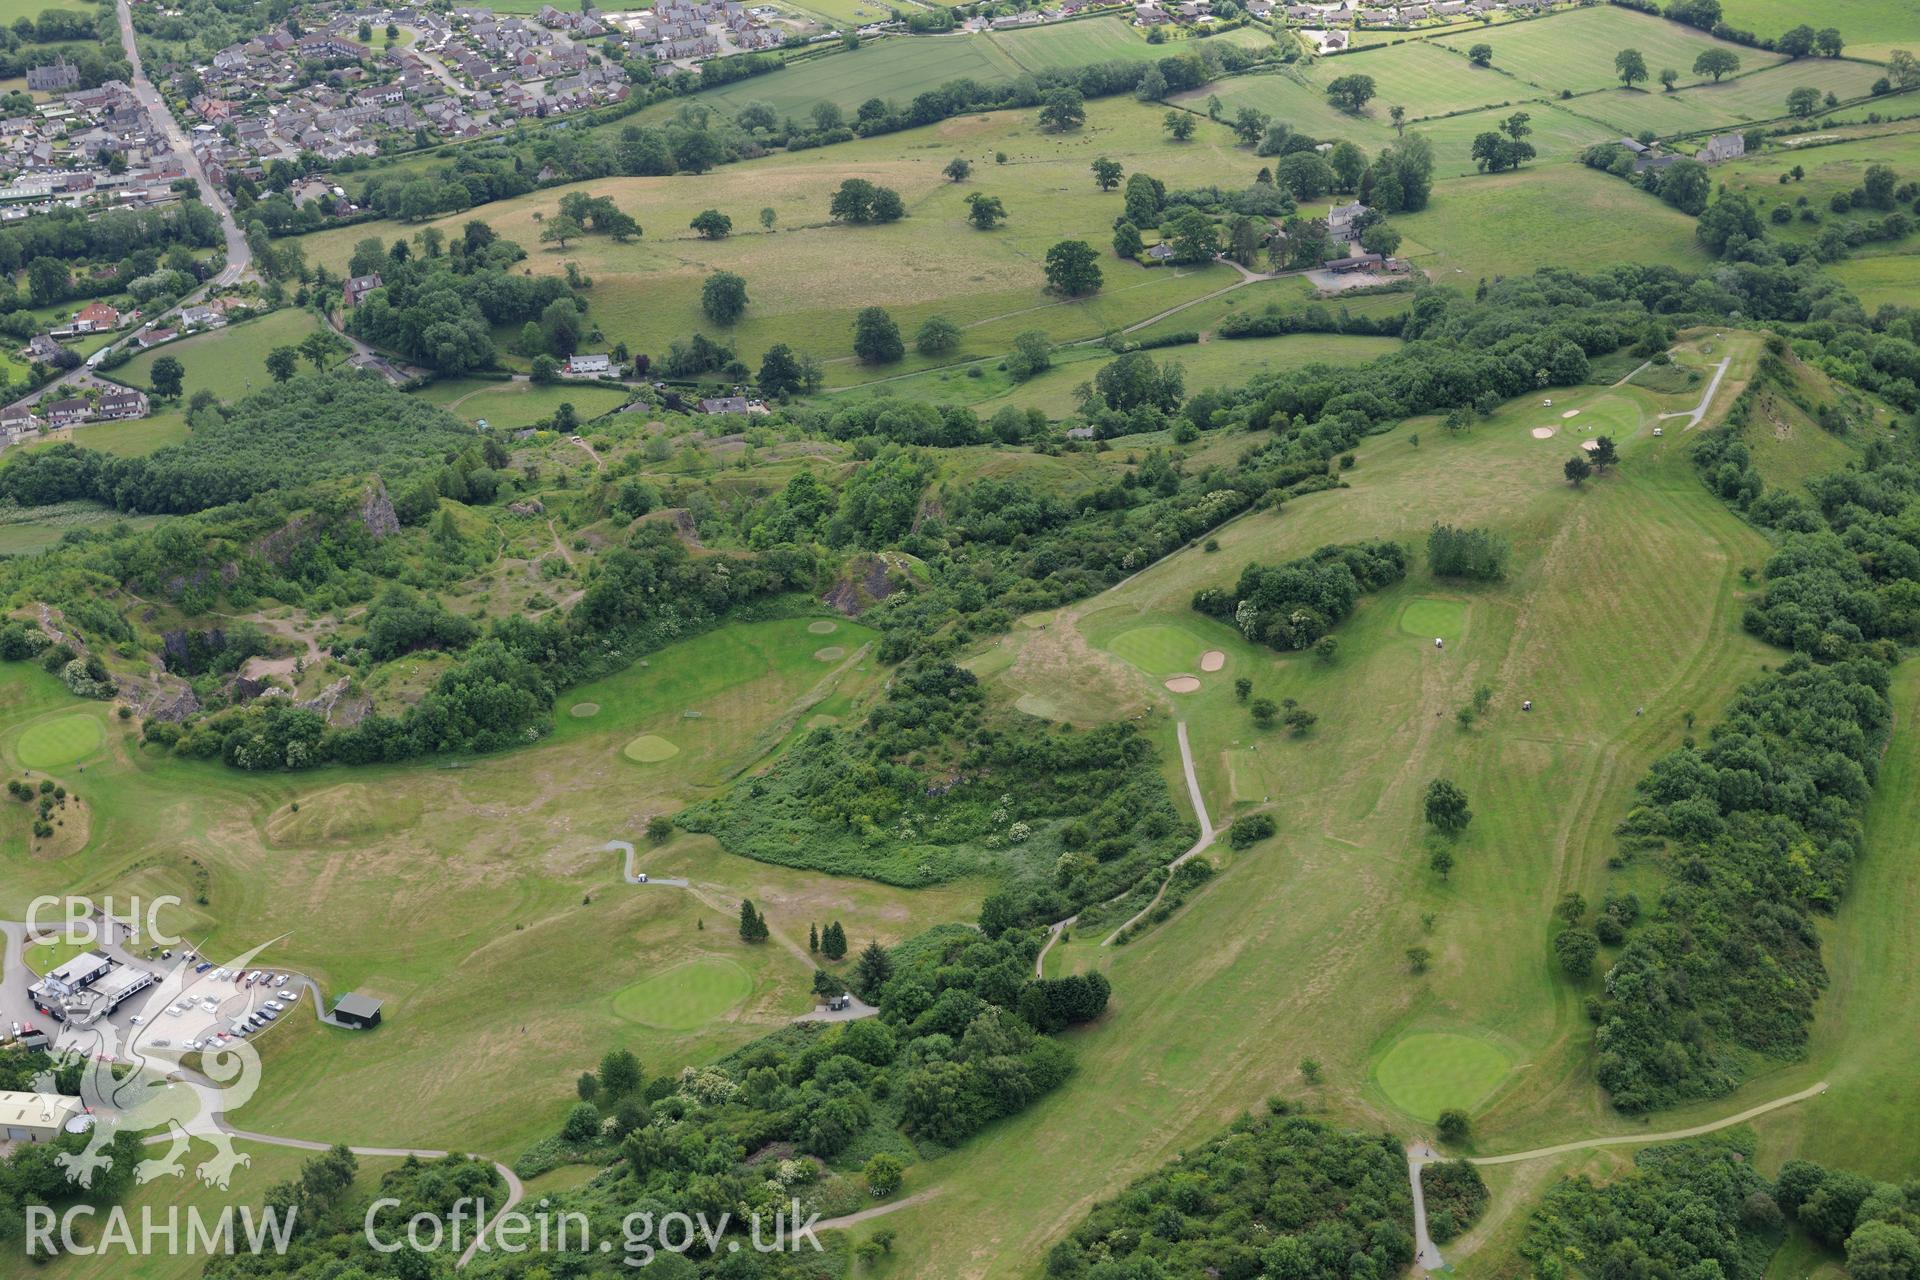 Llanymynech hillfort on the Welsh-English border, south west of Oswestry. Oblique aerial photograph taken during the Royal Commission's programme of archaeological aerial reconnaissance by Toby Driver on 30th June 2015.